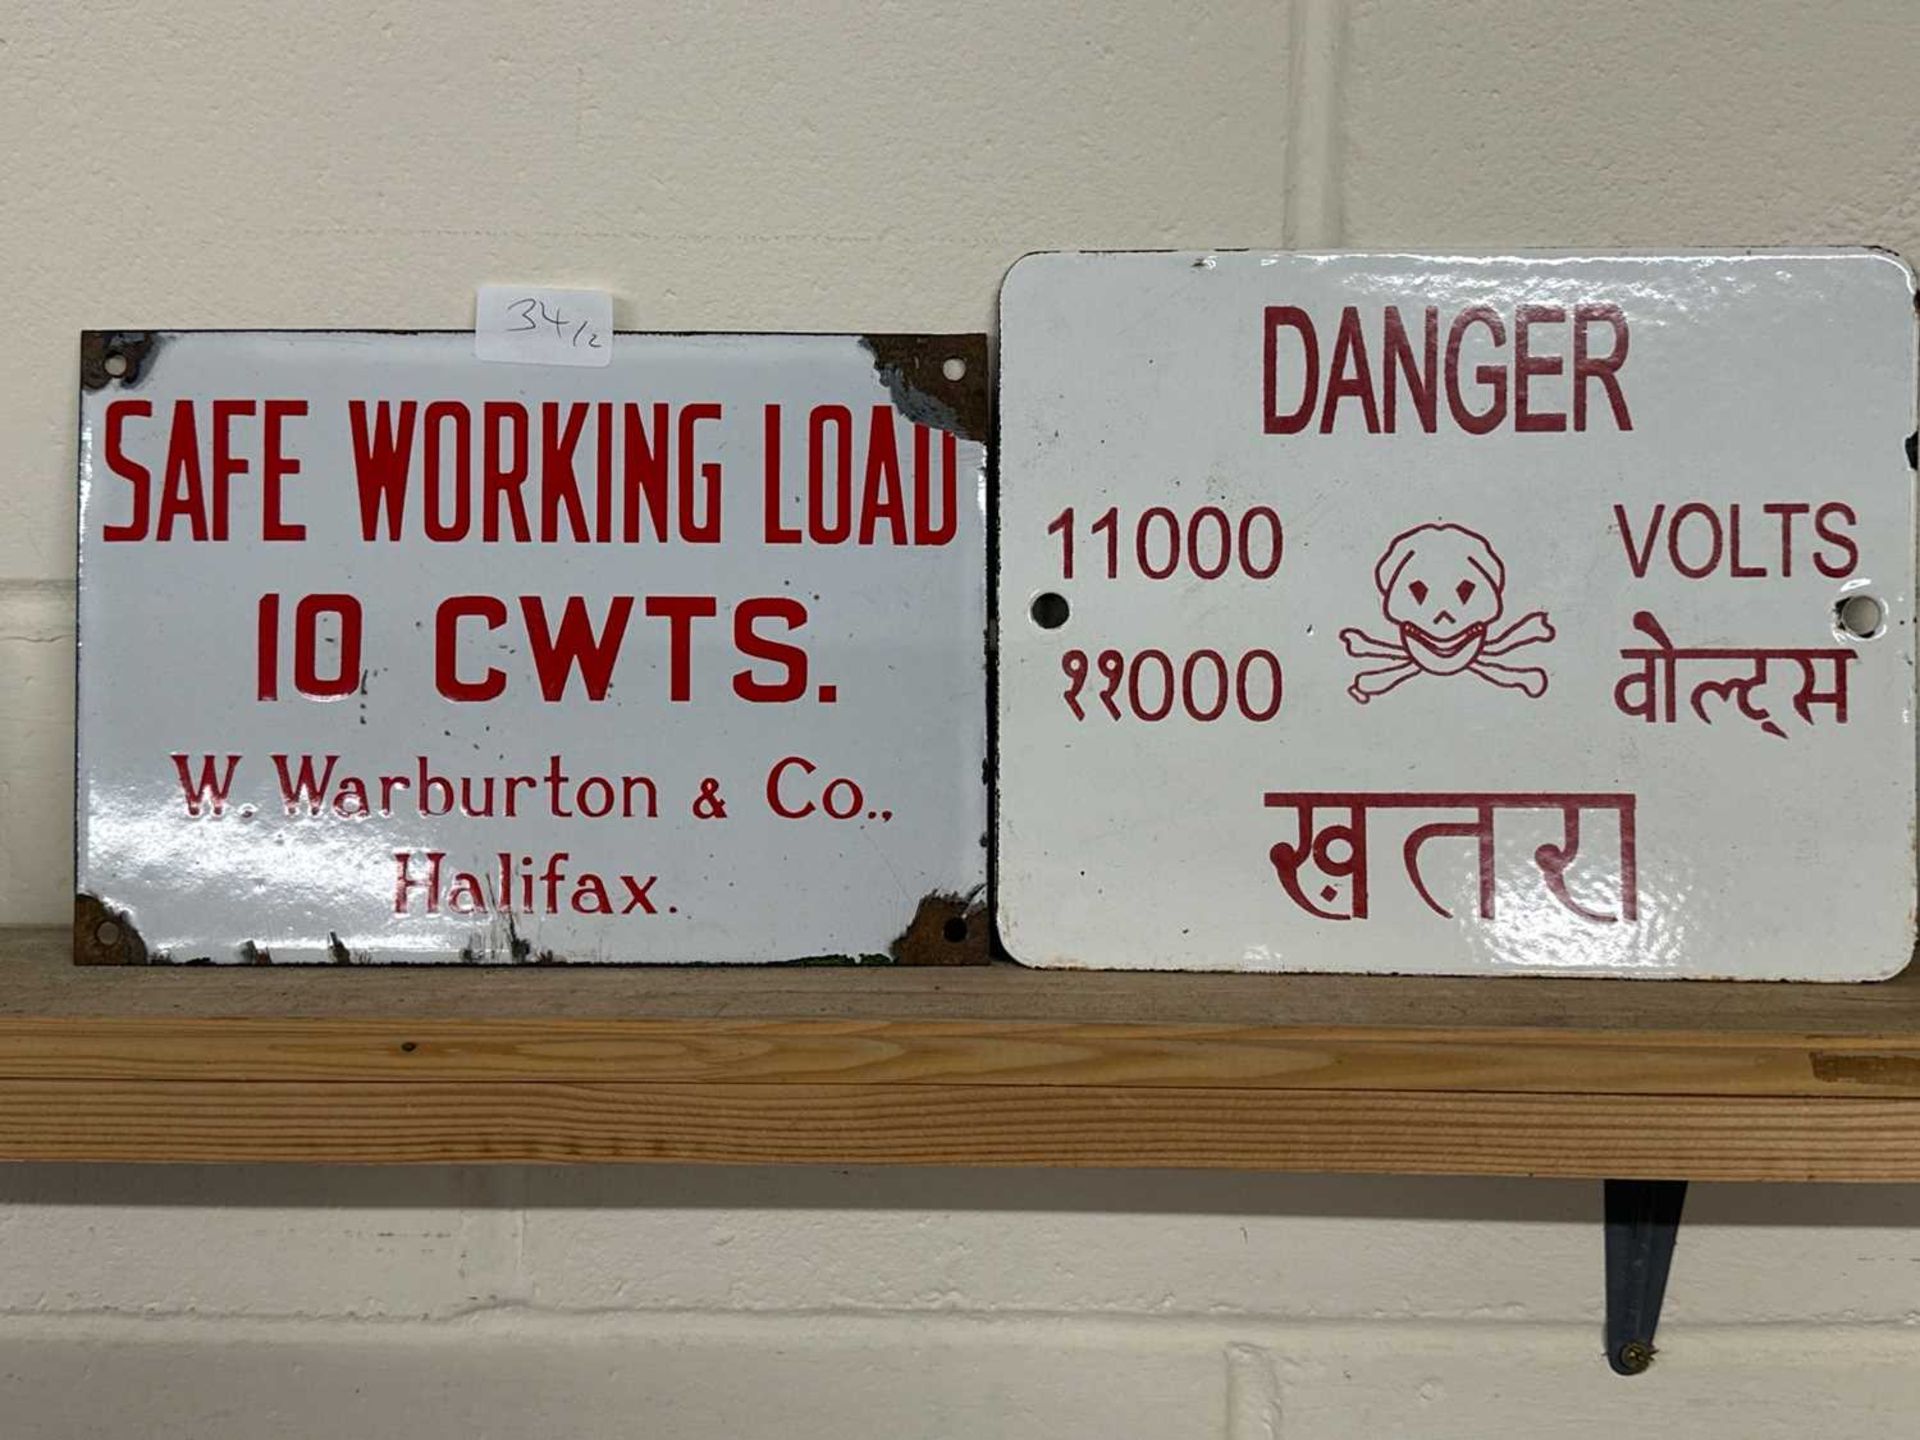 Two metal informational signs including "Safe Working Load 10cwts W Warburton & Co Halifax" and a